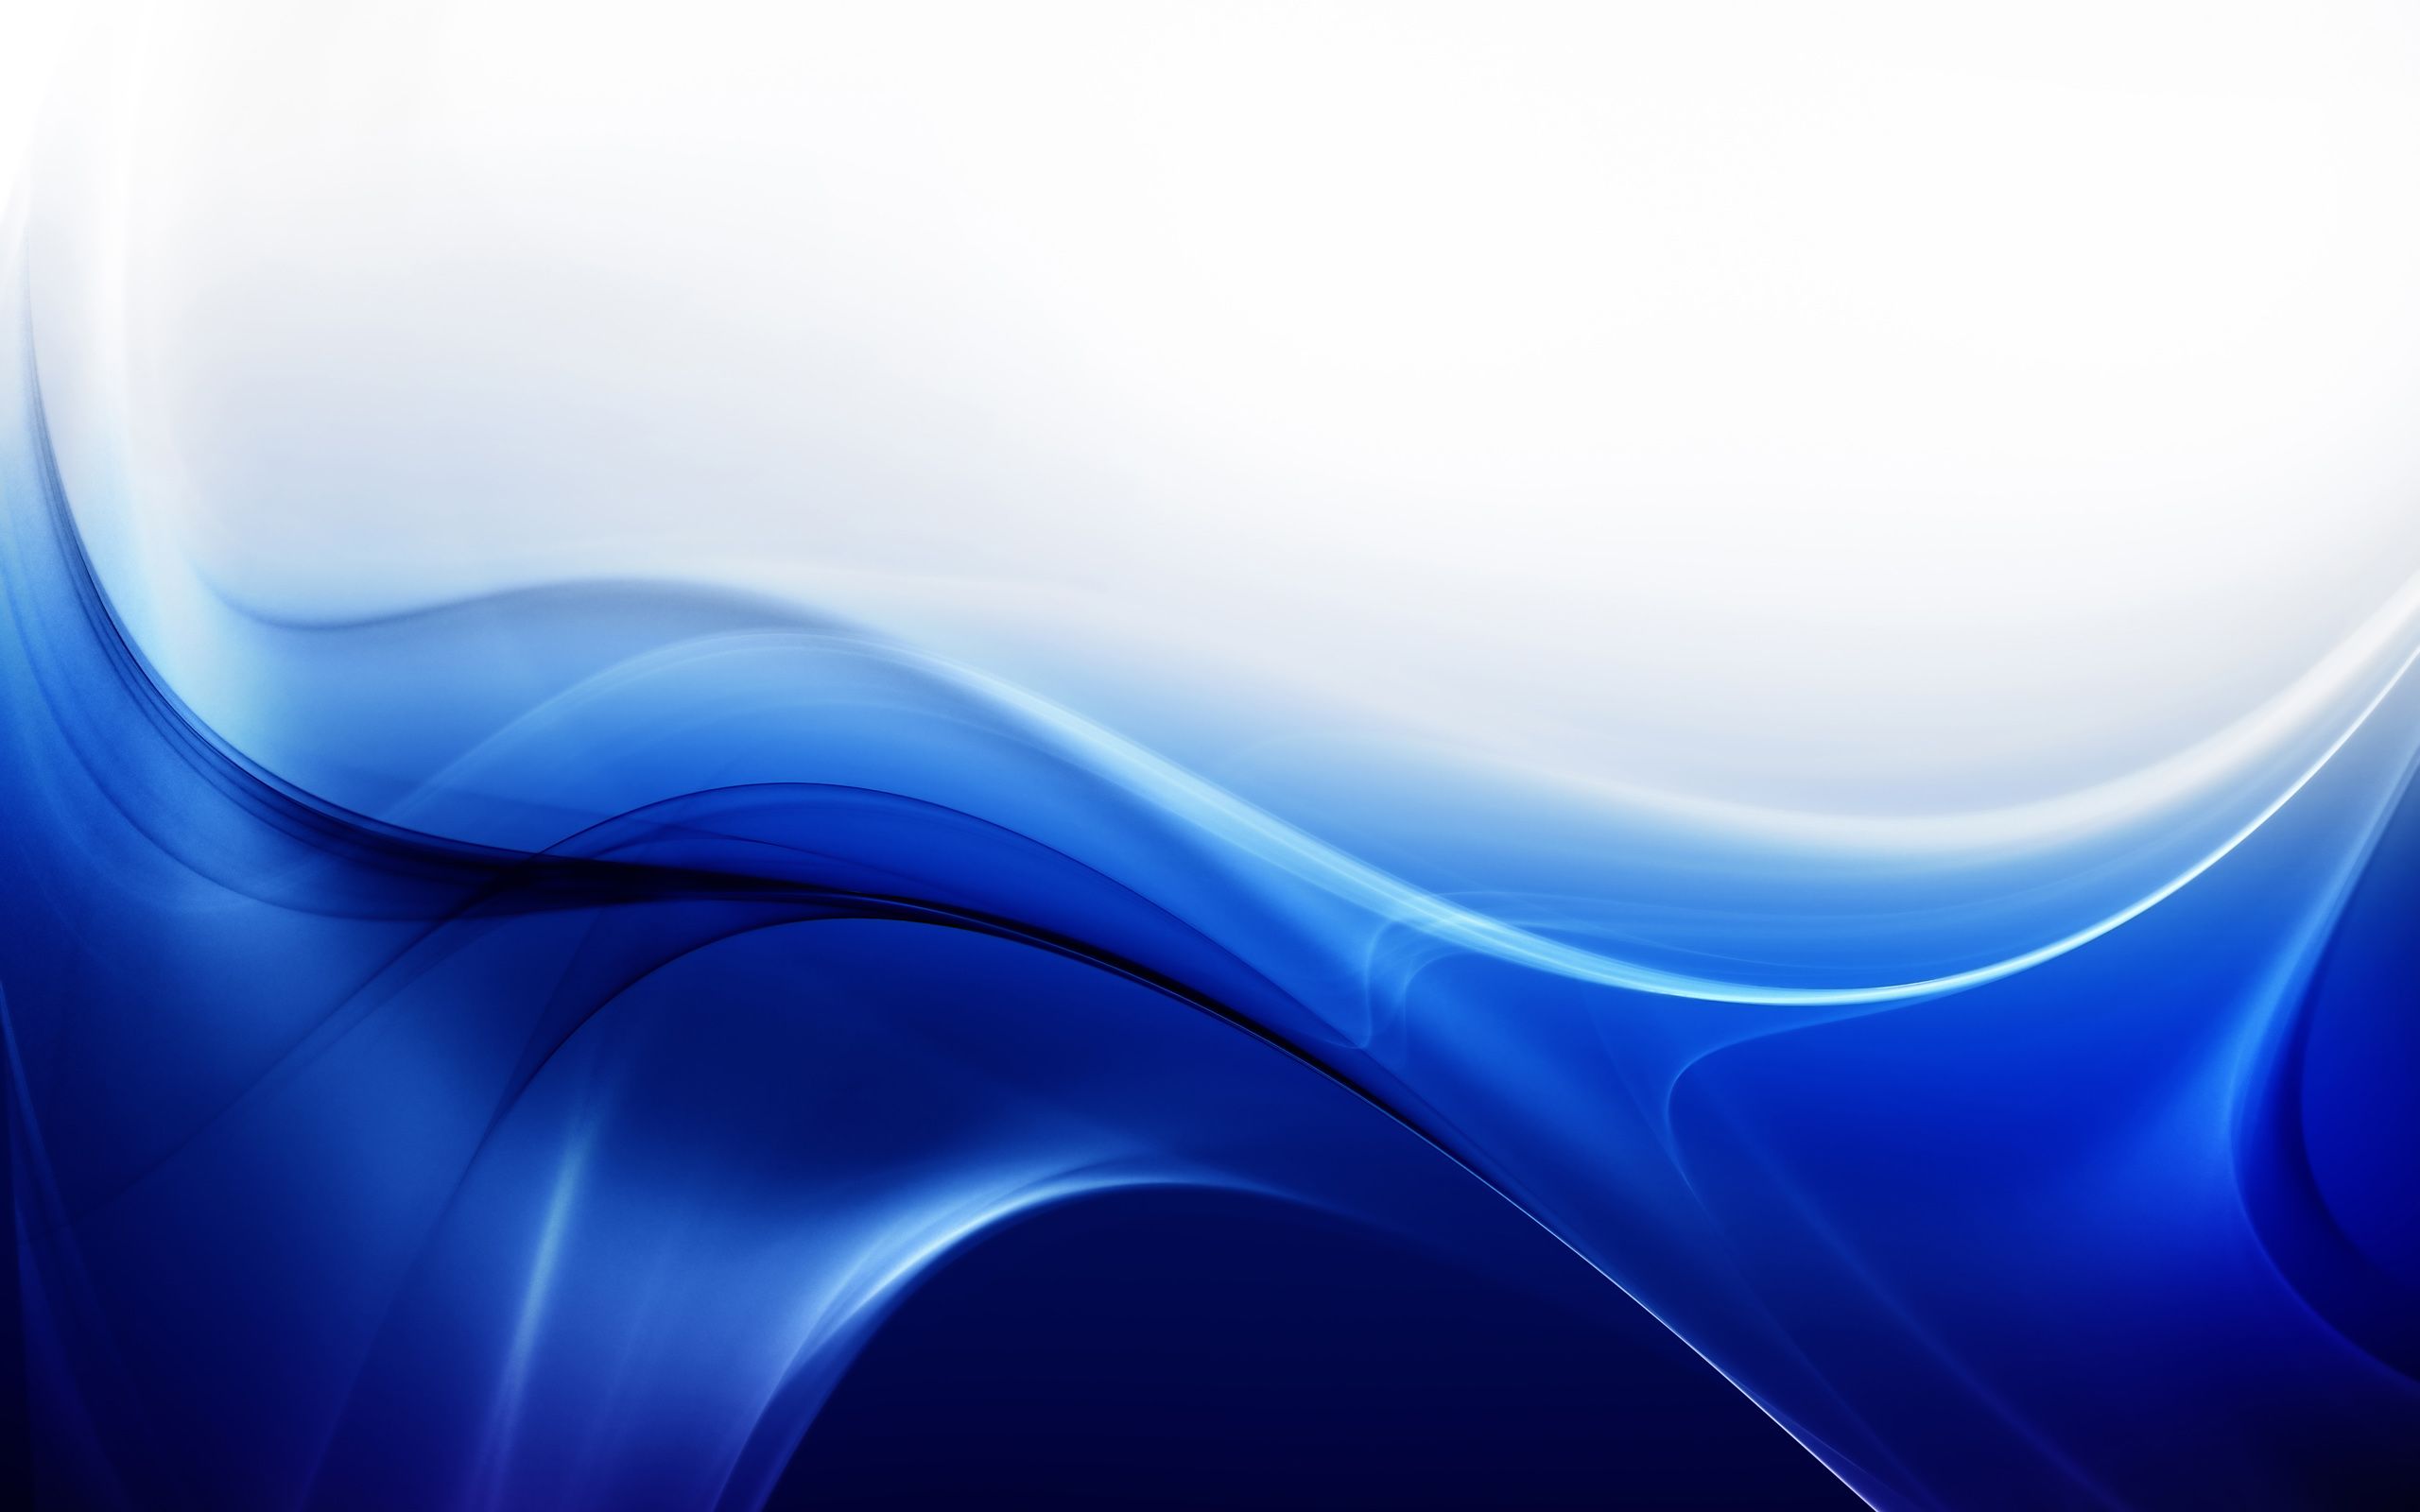 4K Blue Wallpaper Background That Will Give Your Desktop Perfect Readability